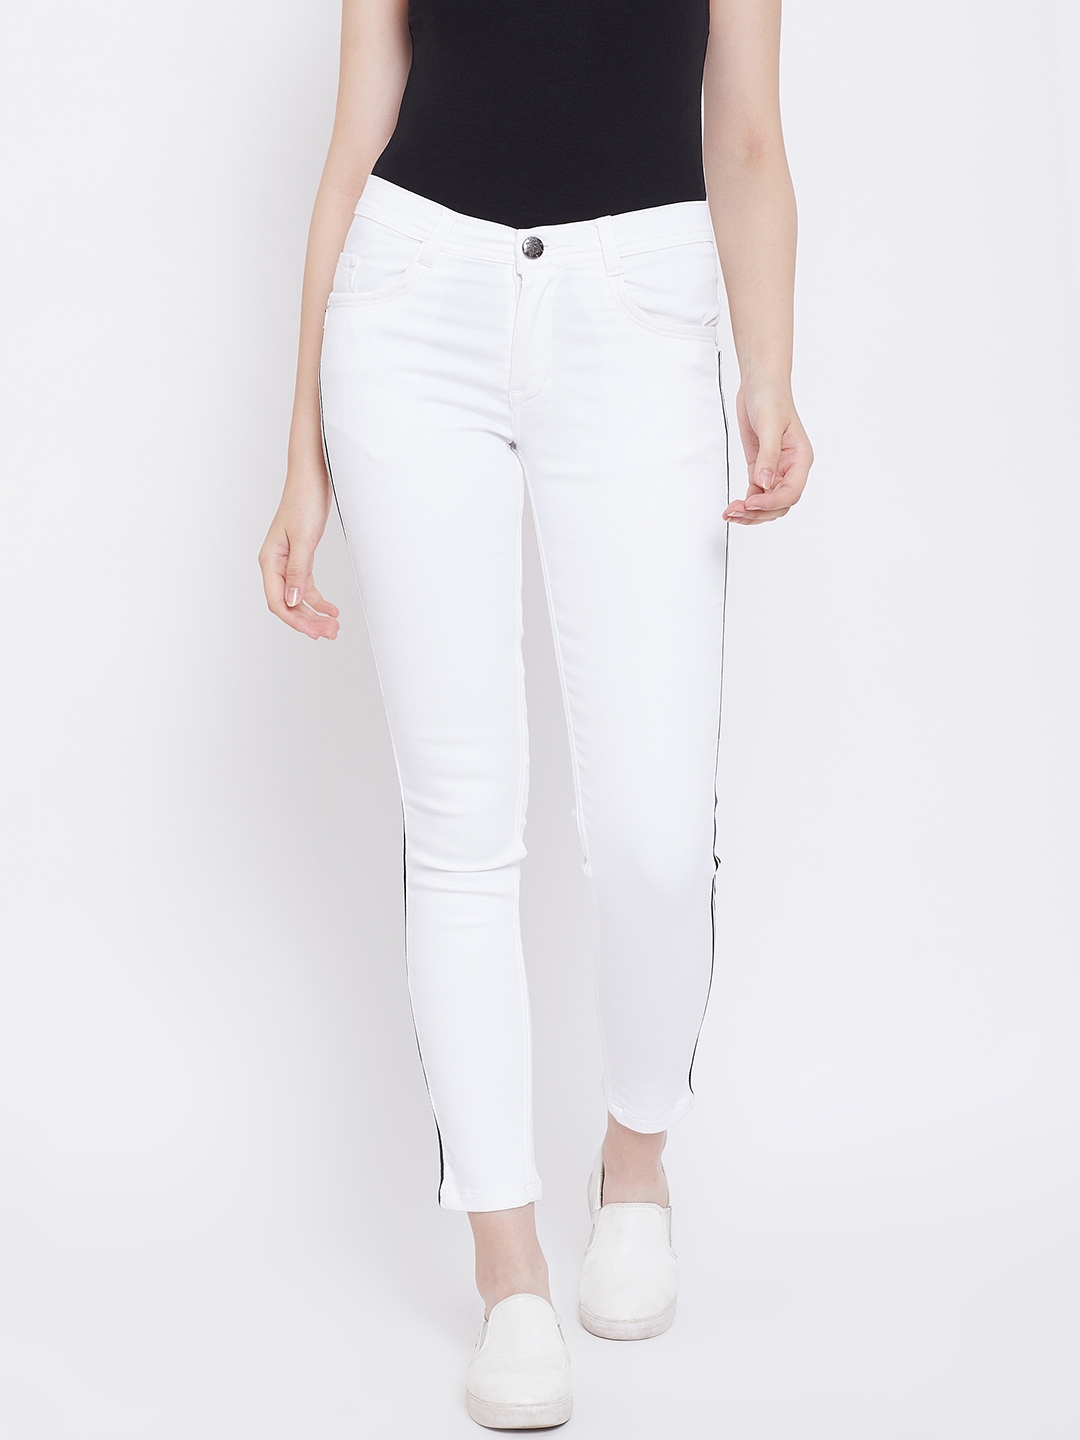 Nifty | Nifty Women's Jeans 0